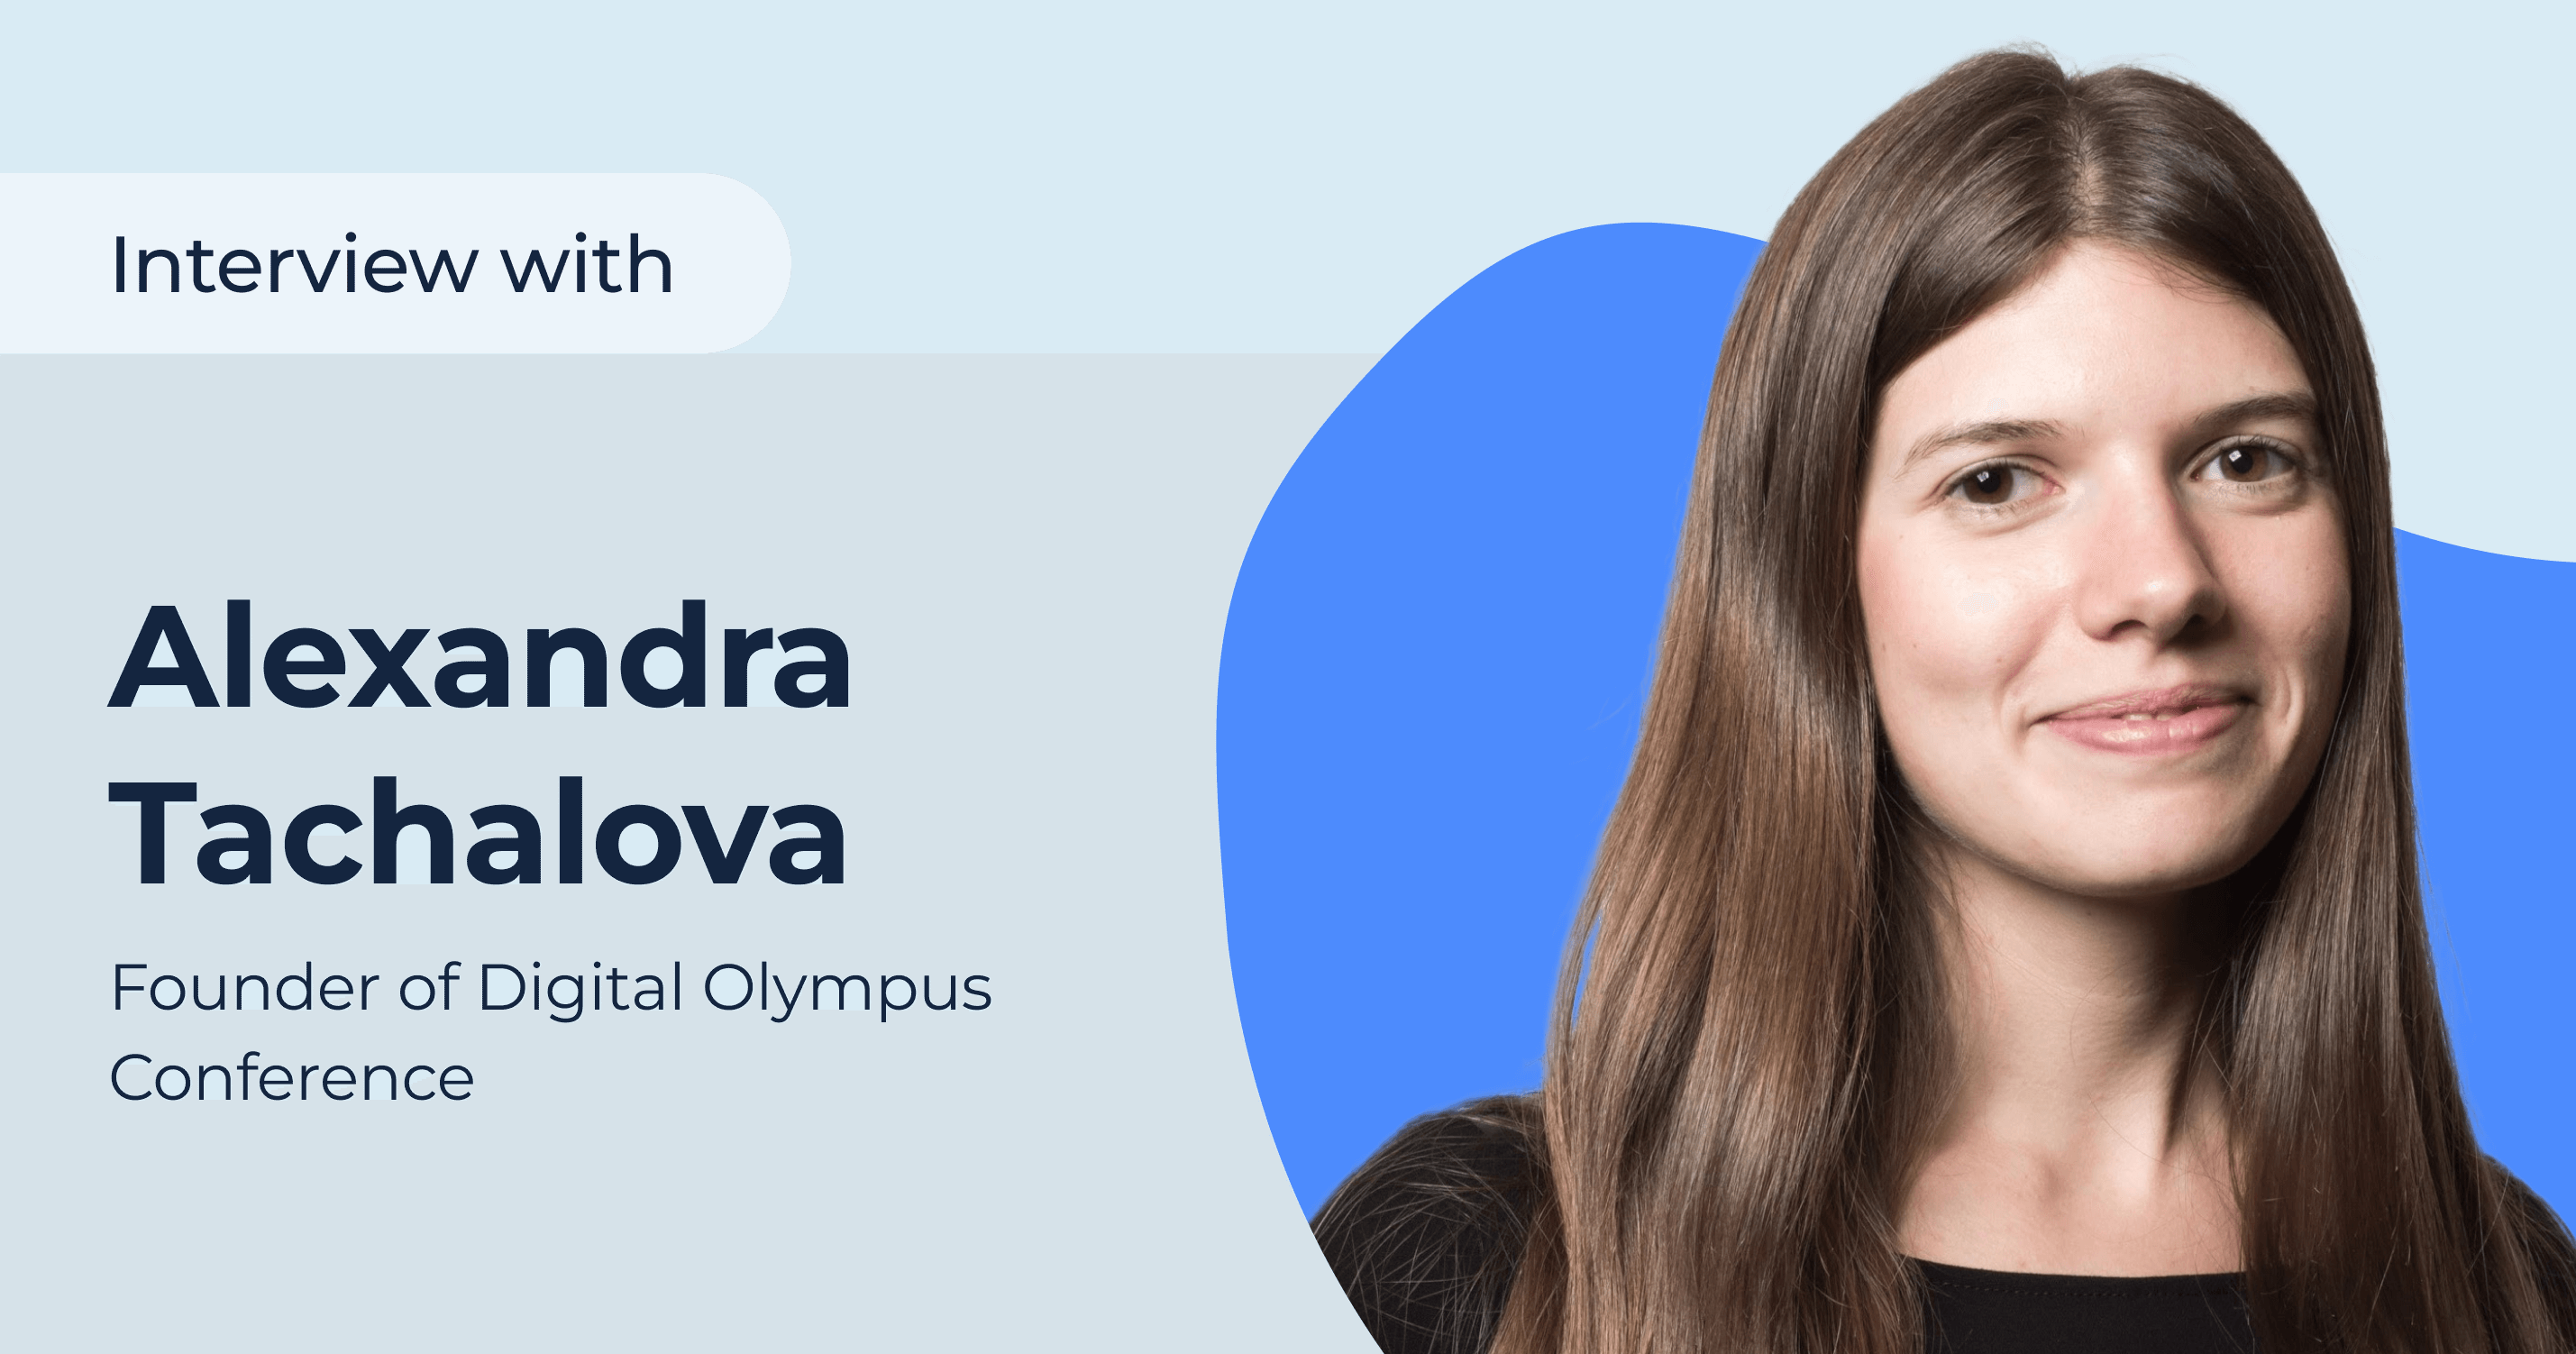 Interview with Alexandra Tachalova, Founder of Digital Olympus Conference